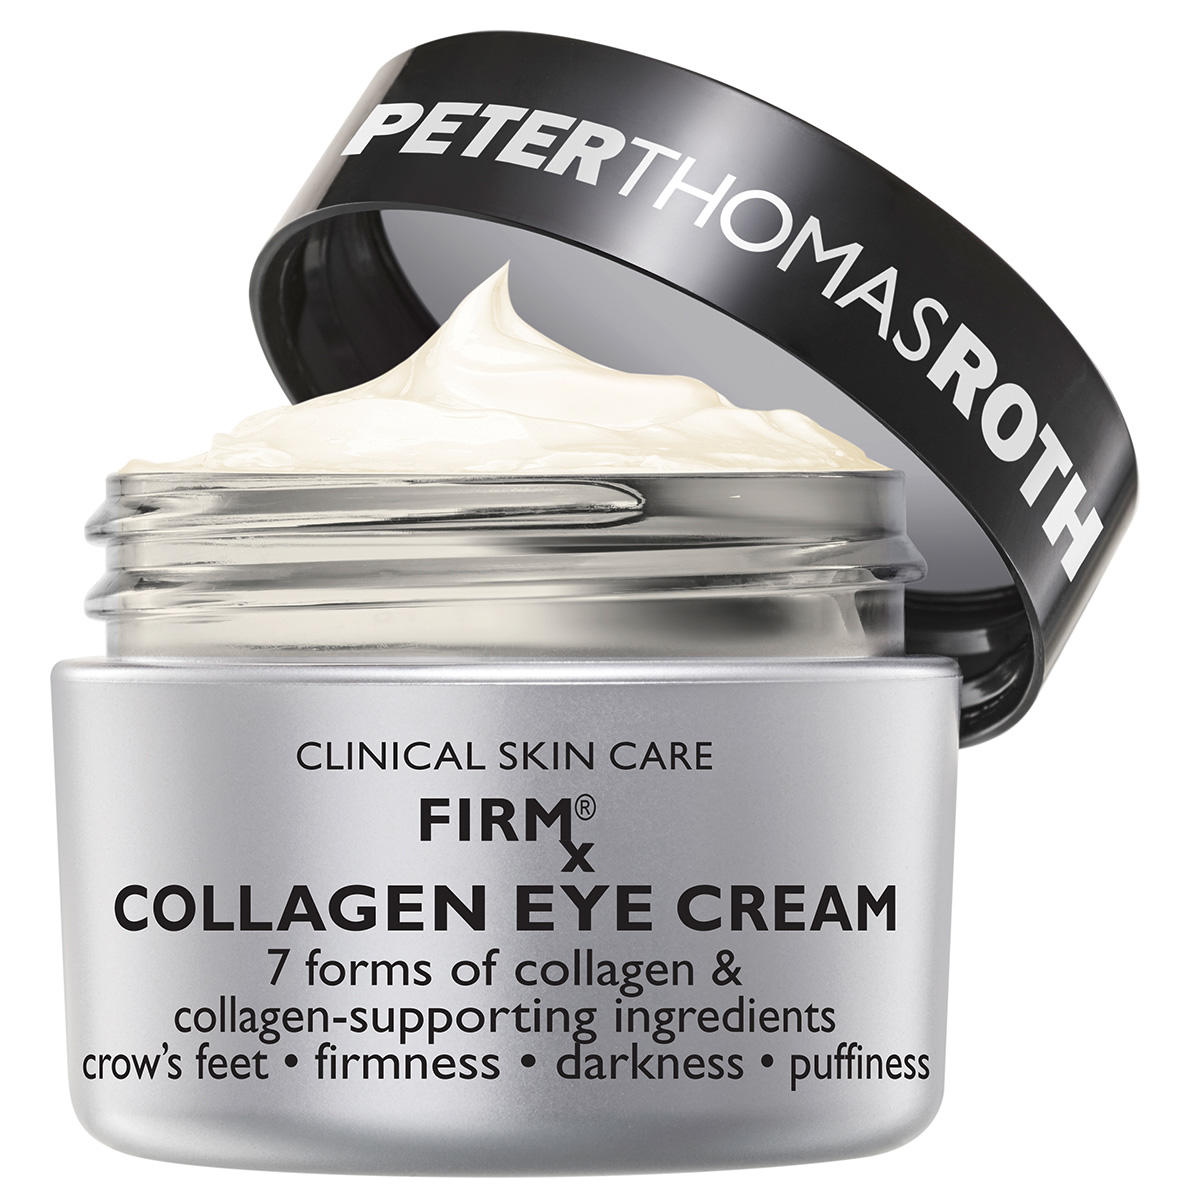 PETER THOMAS ROTH CLINICAL SKIN CARE FIRMx Collagen Eye Cream 15 ml - 2